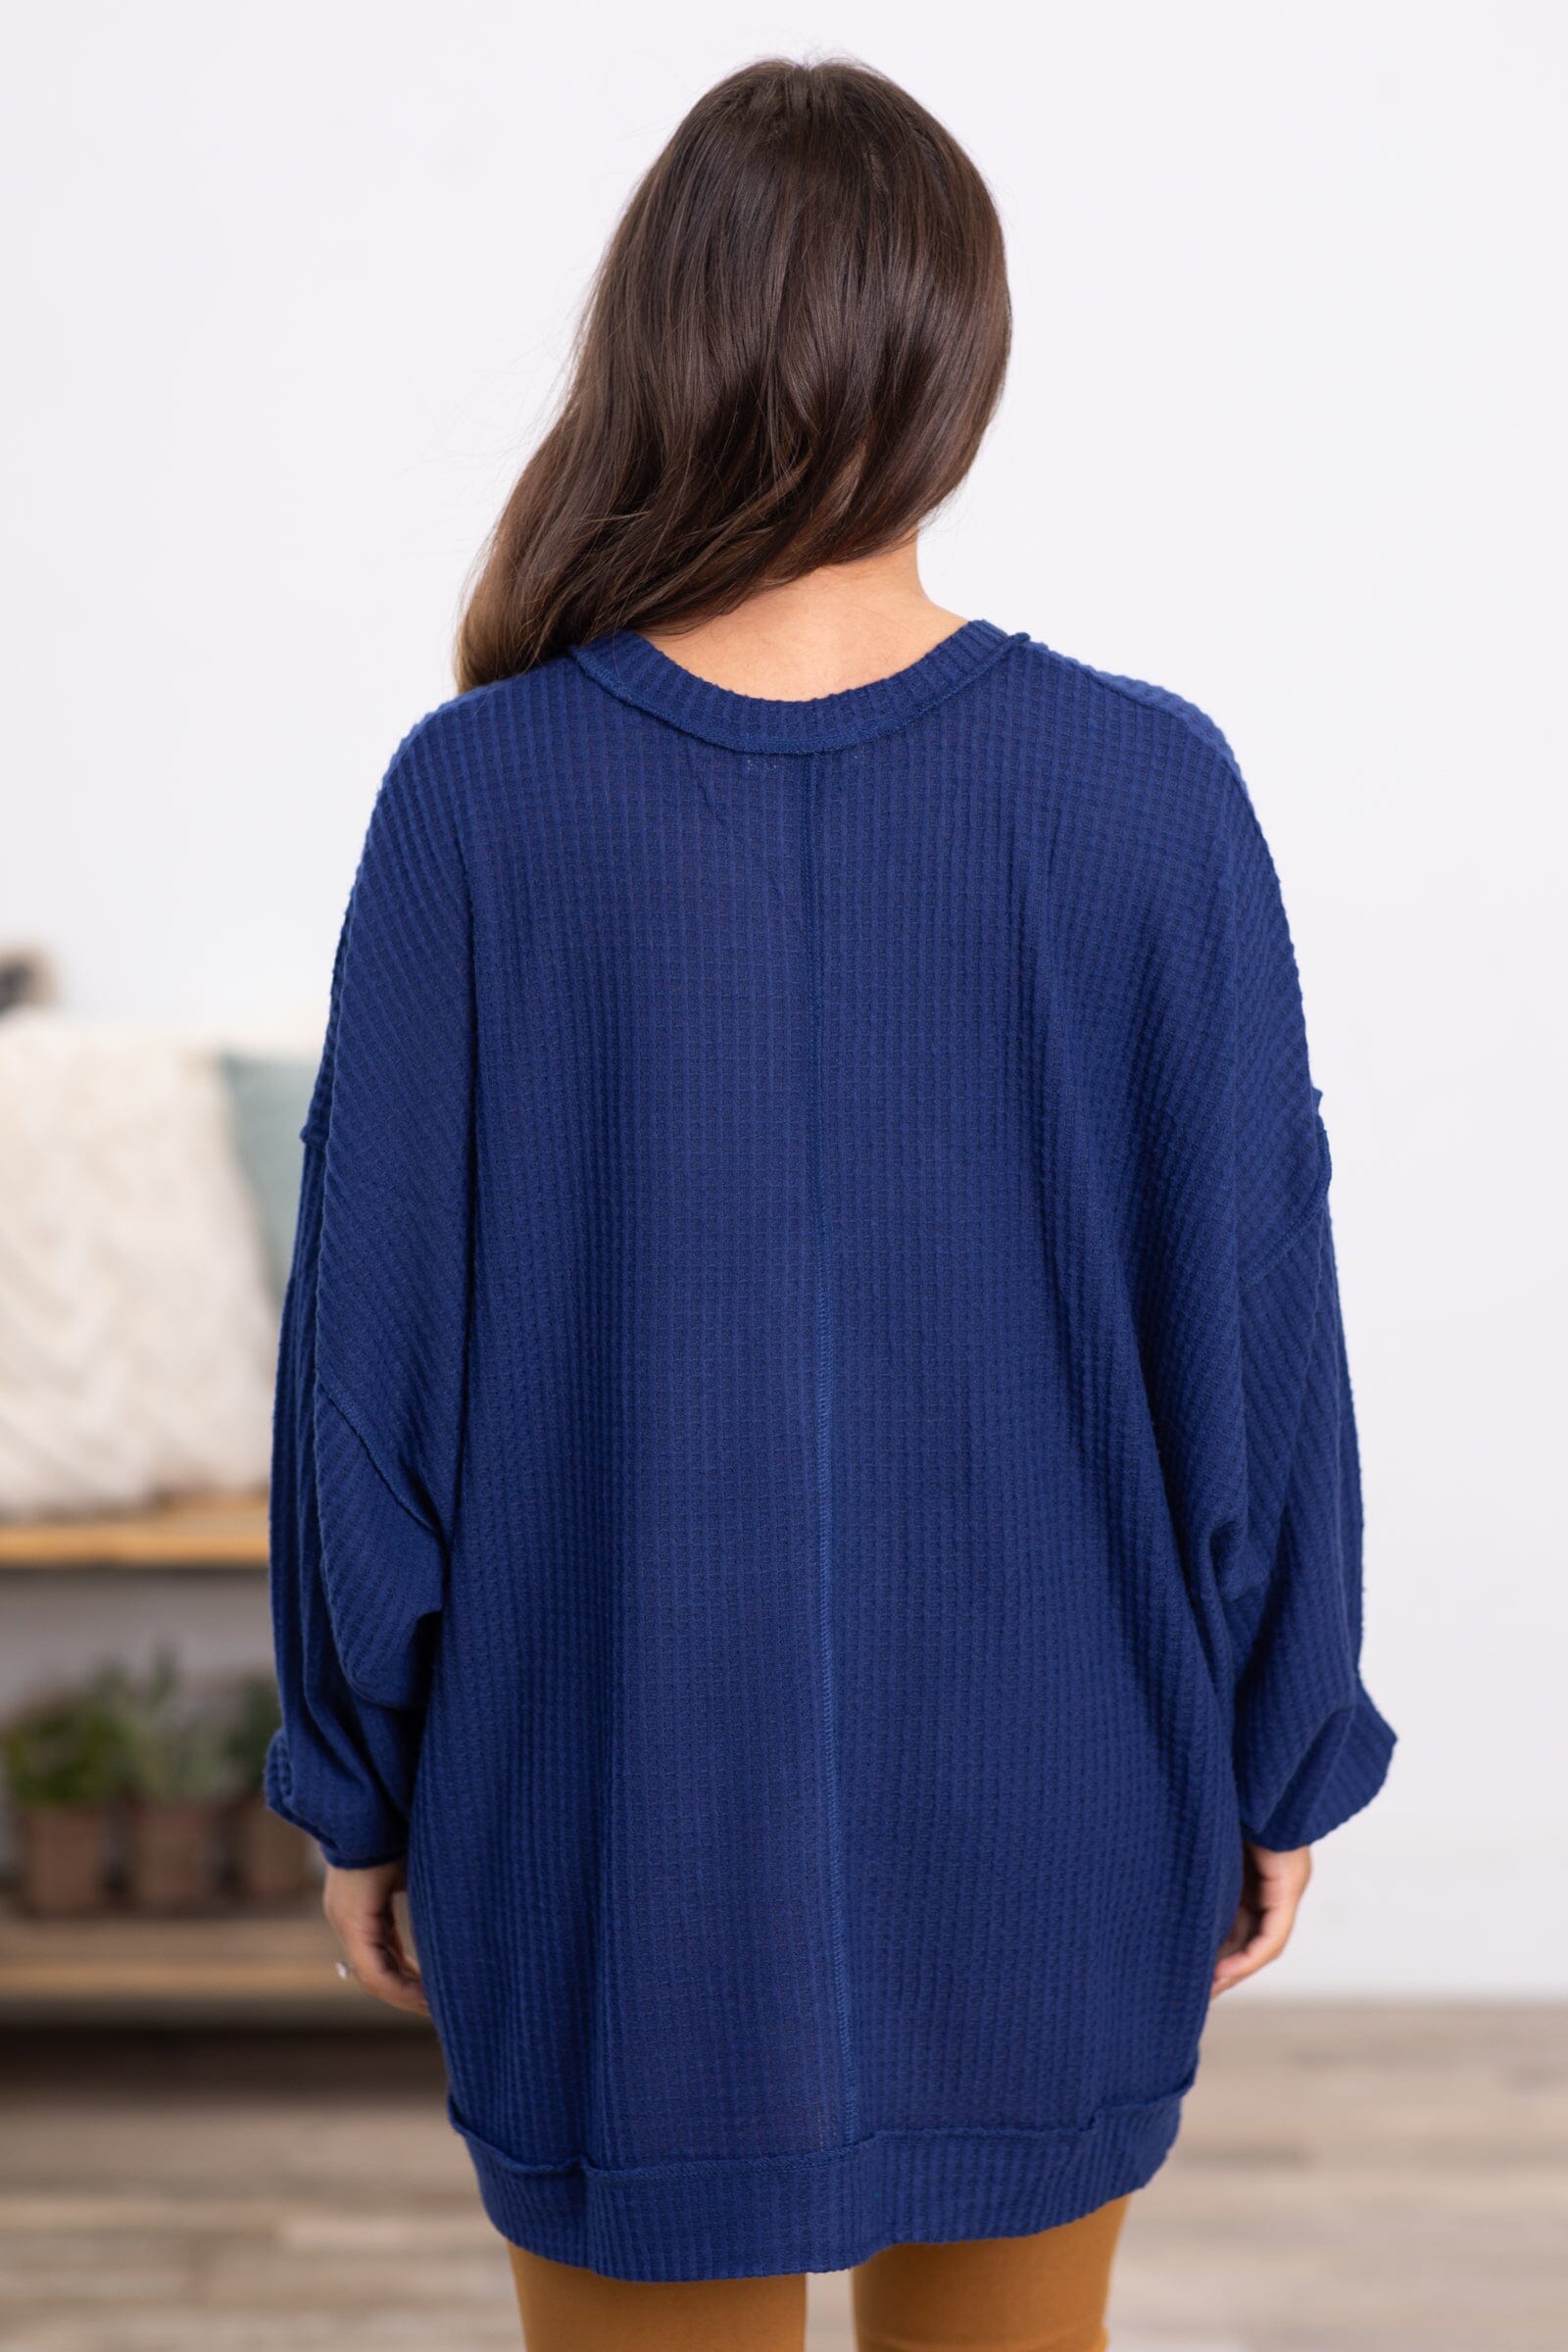 Navy Waffle Knit Sweater With Seam Detail - Filly Flair